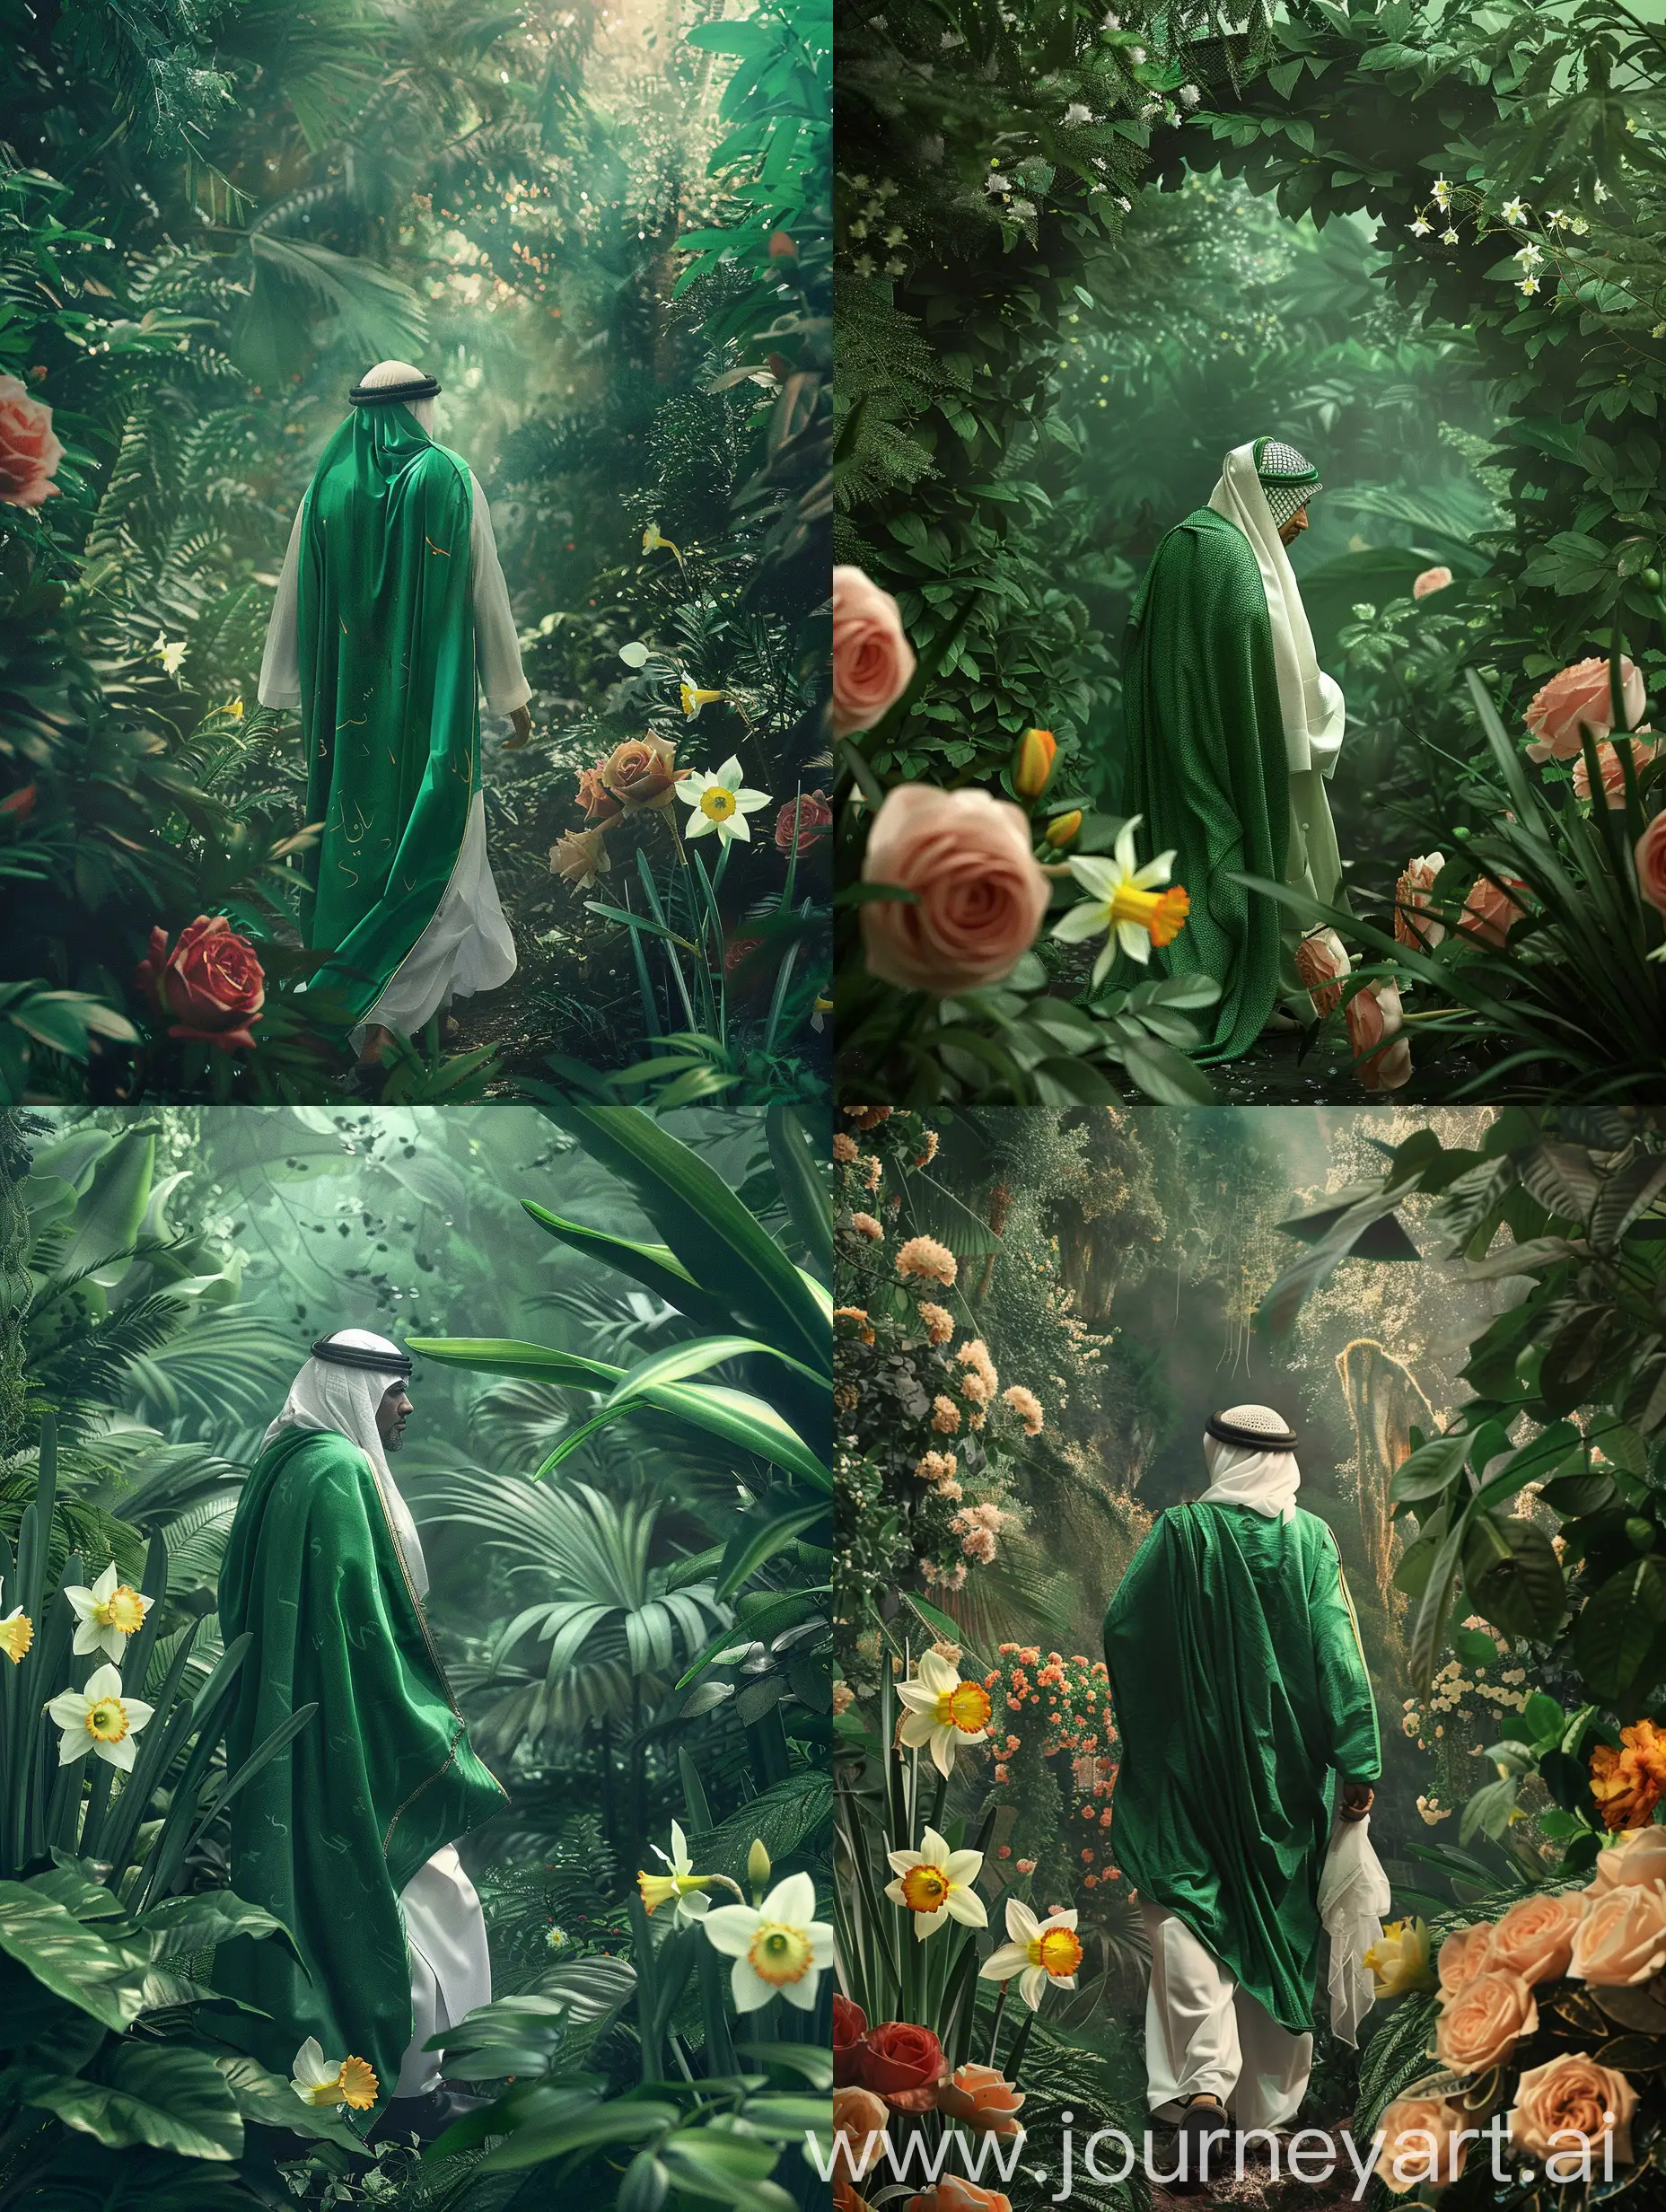 Islamic-Man-in-Green-and-White-Arabic-Attire-Walking-into-a-Cosmic-Jungle-of-Roses-and-Narcissus-Flowers